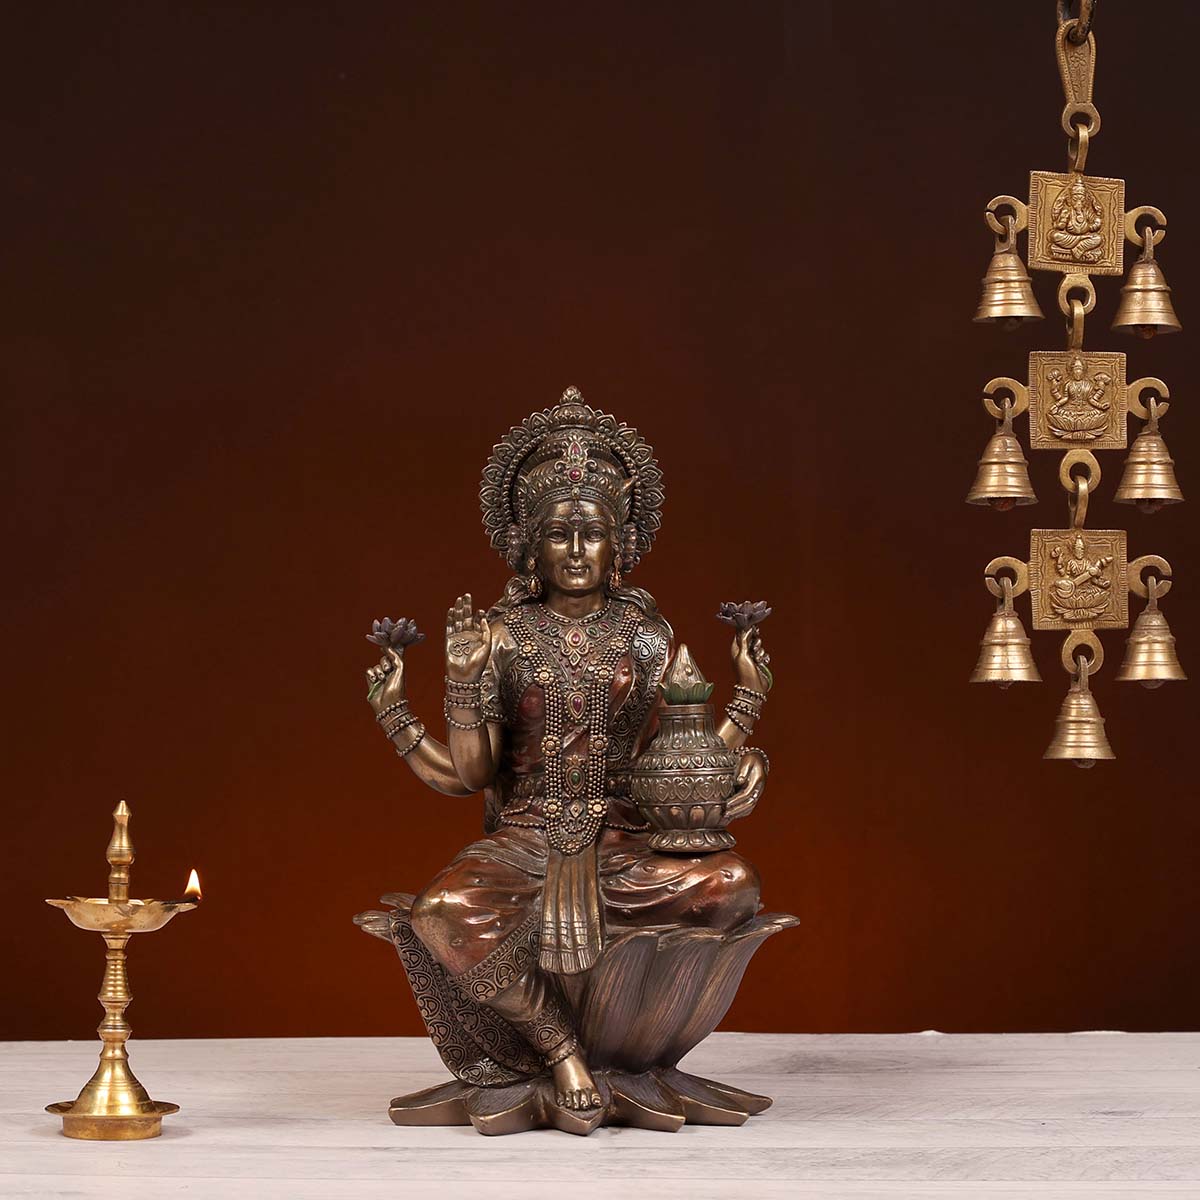 Lord Laxmi Sitting With lotus made of Bronze Composite - 8 x 7.5 x 12.5 Inch, 1.7 Kg